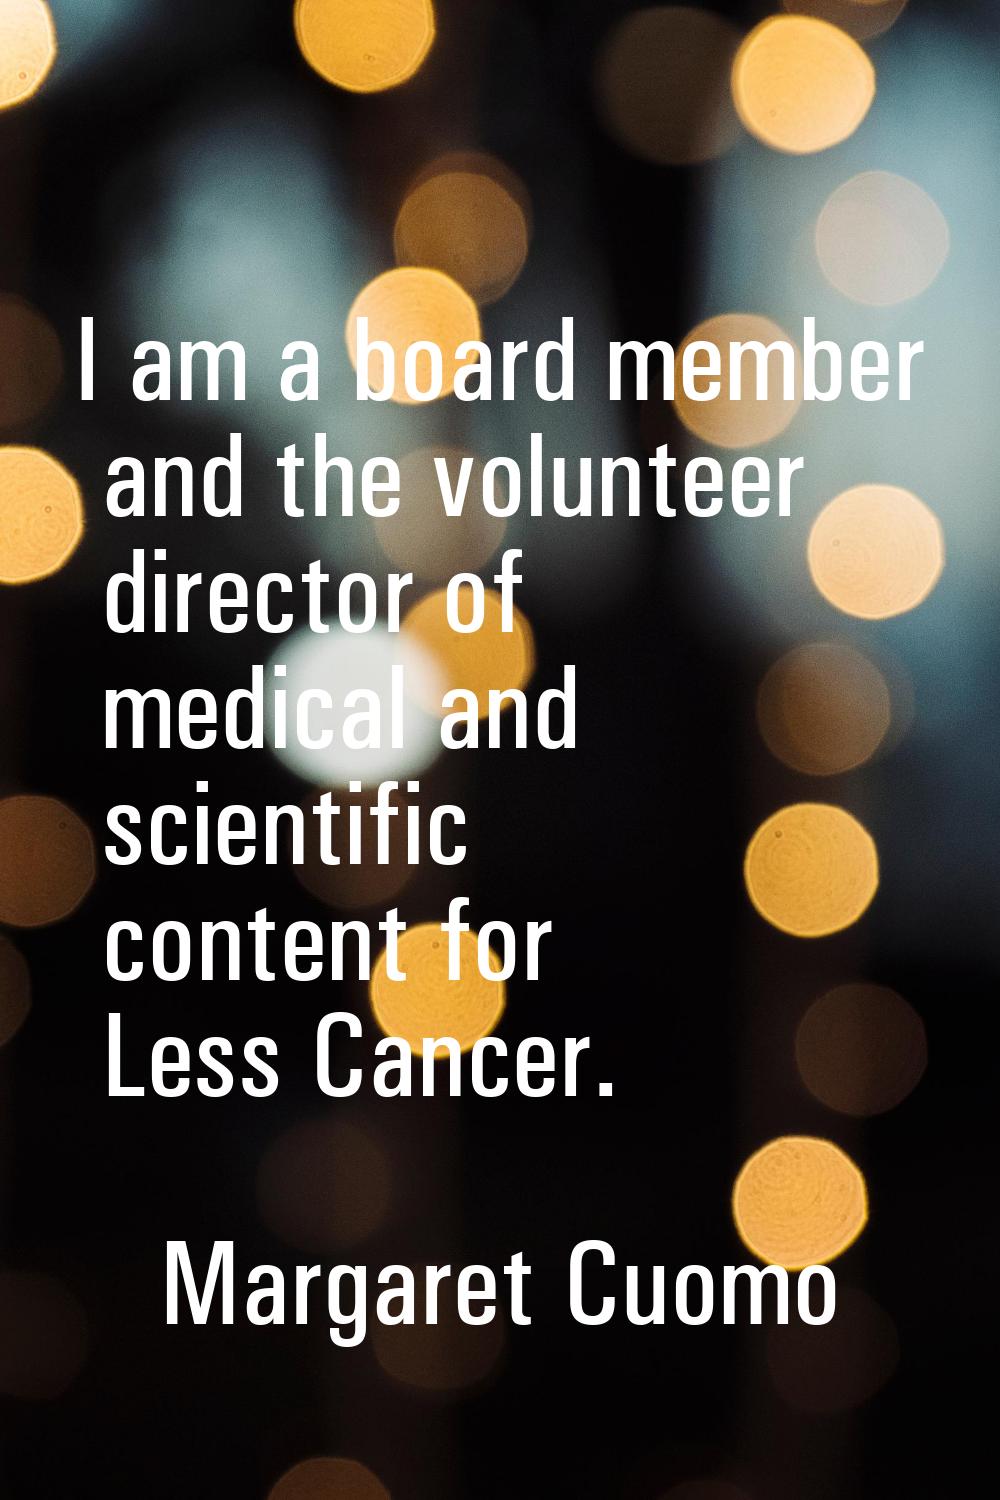 I am a board member and the volunteer director of medical and scientific content for Less Cancer.